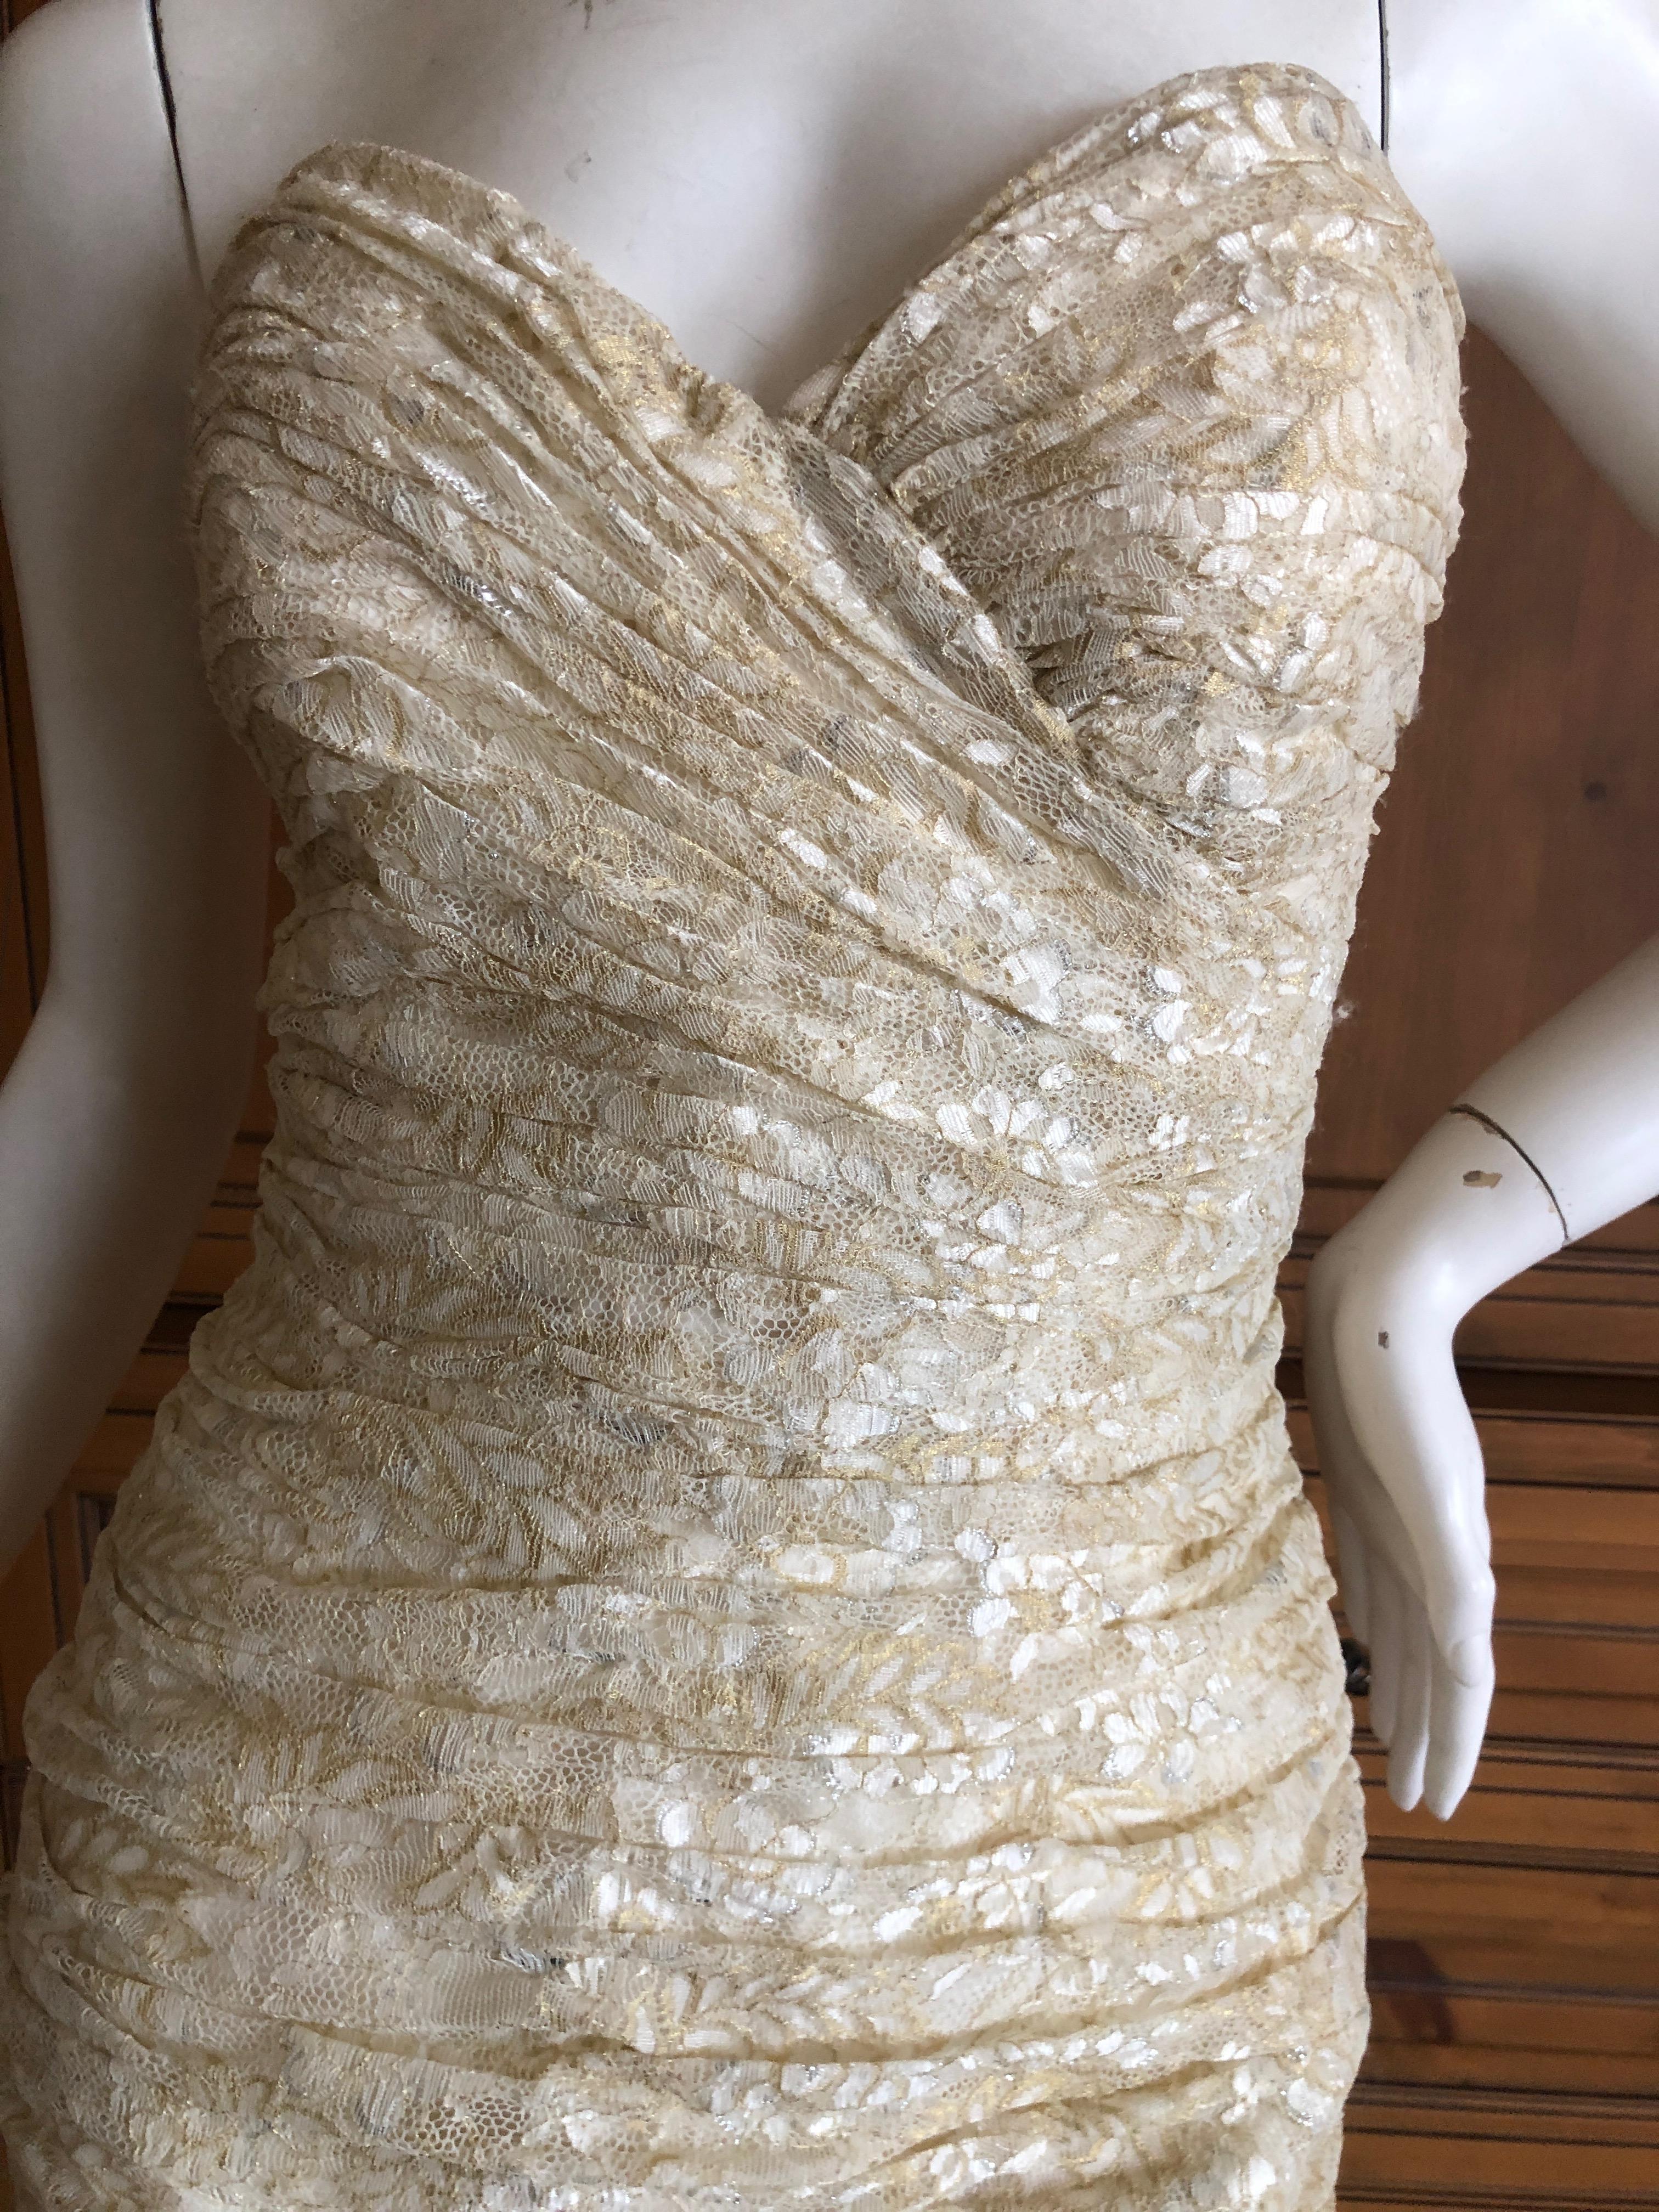 Vicky Tiel Paris 80's Gold Lace Strapless Cocktail Dress
The witty quote was 